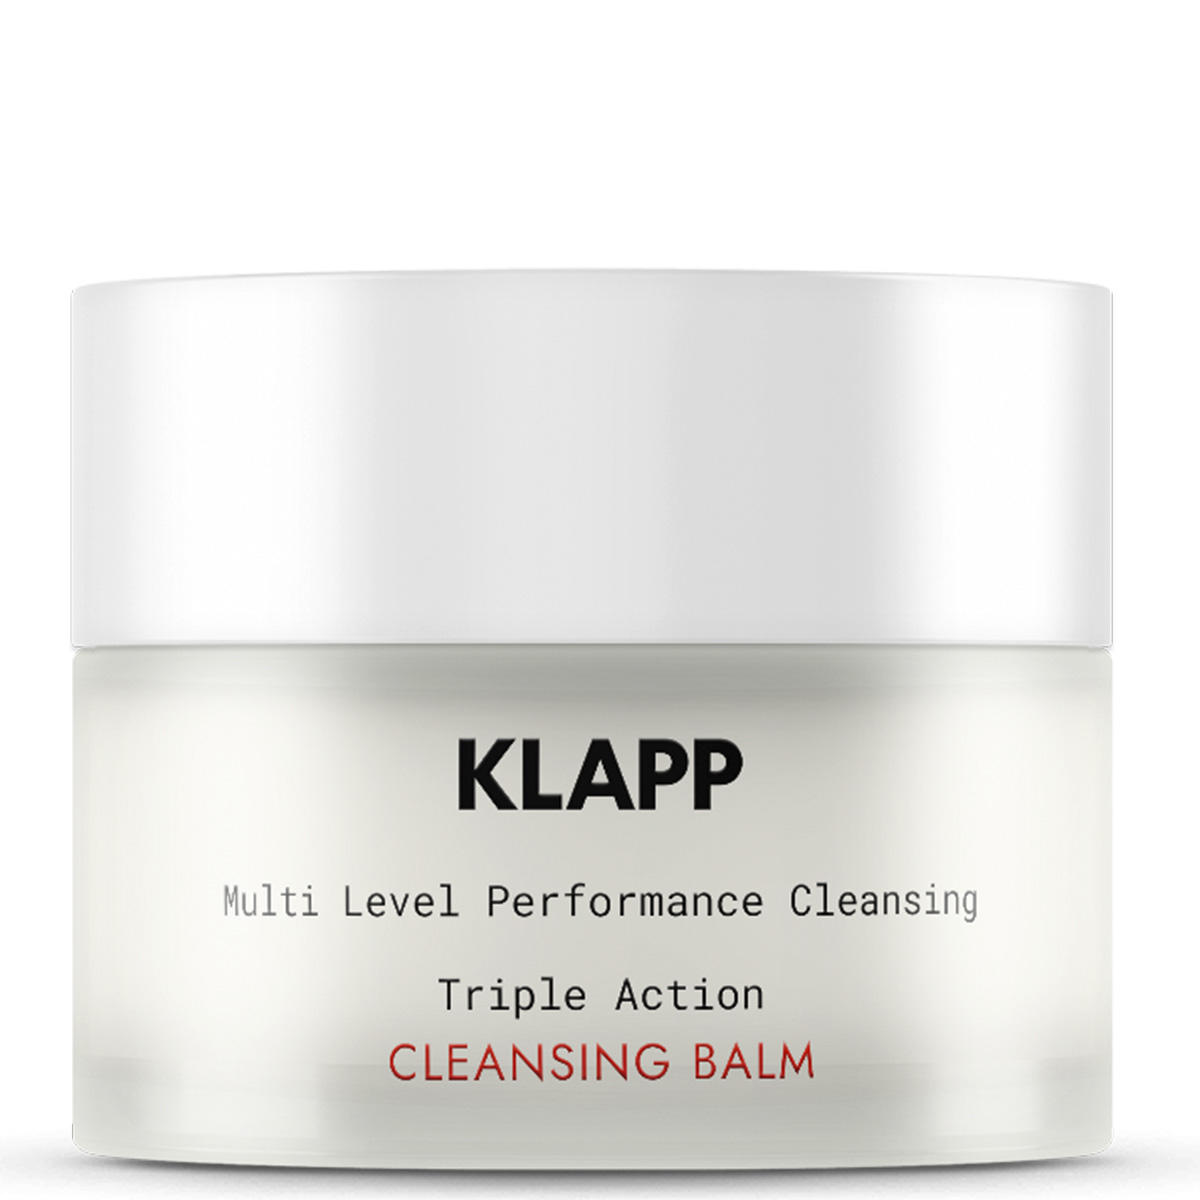 KLAPP Multi Level Performance Cleansing Triple Action CLEANSING BALM 50 ml - 1